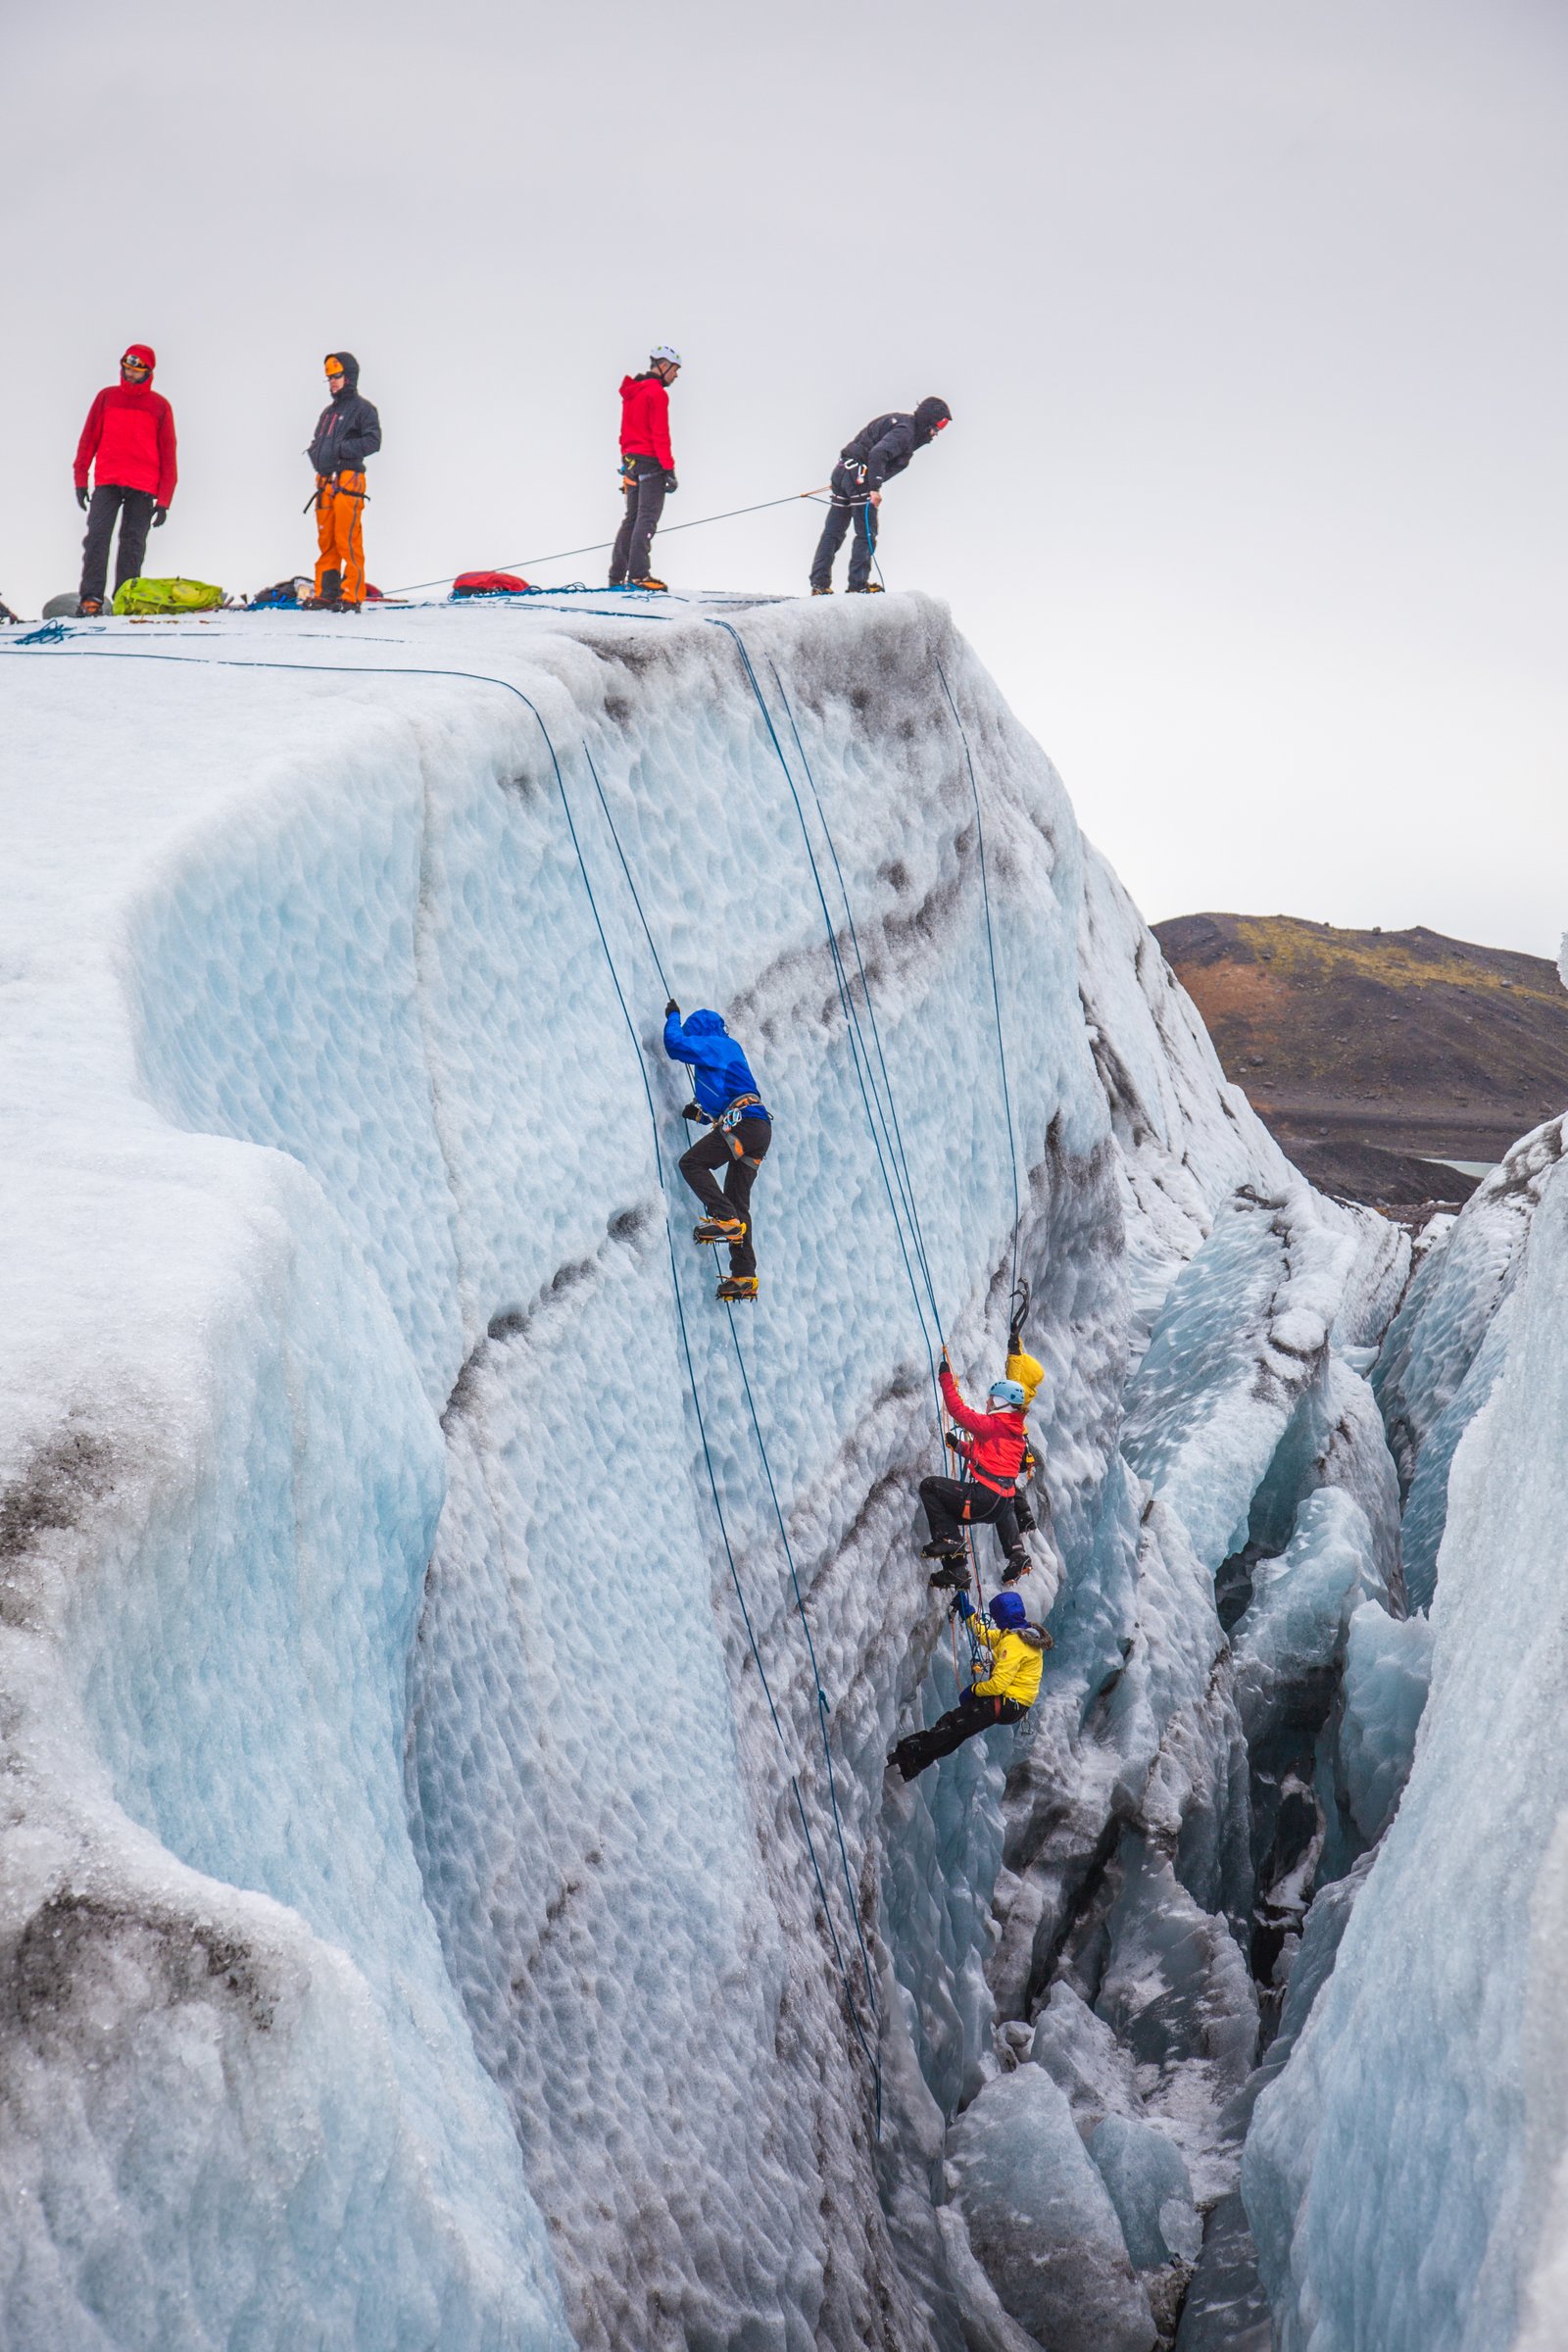 A croup of ice climbers climbing down a glacier wall. Some are waiting on the rim,while others are climbing down.